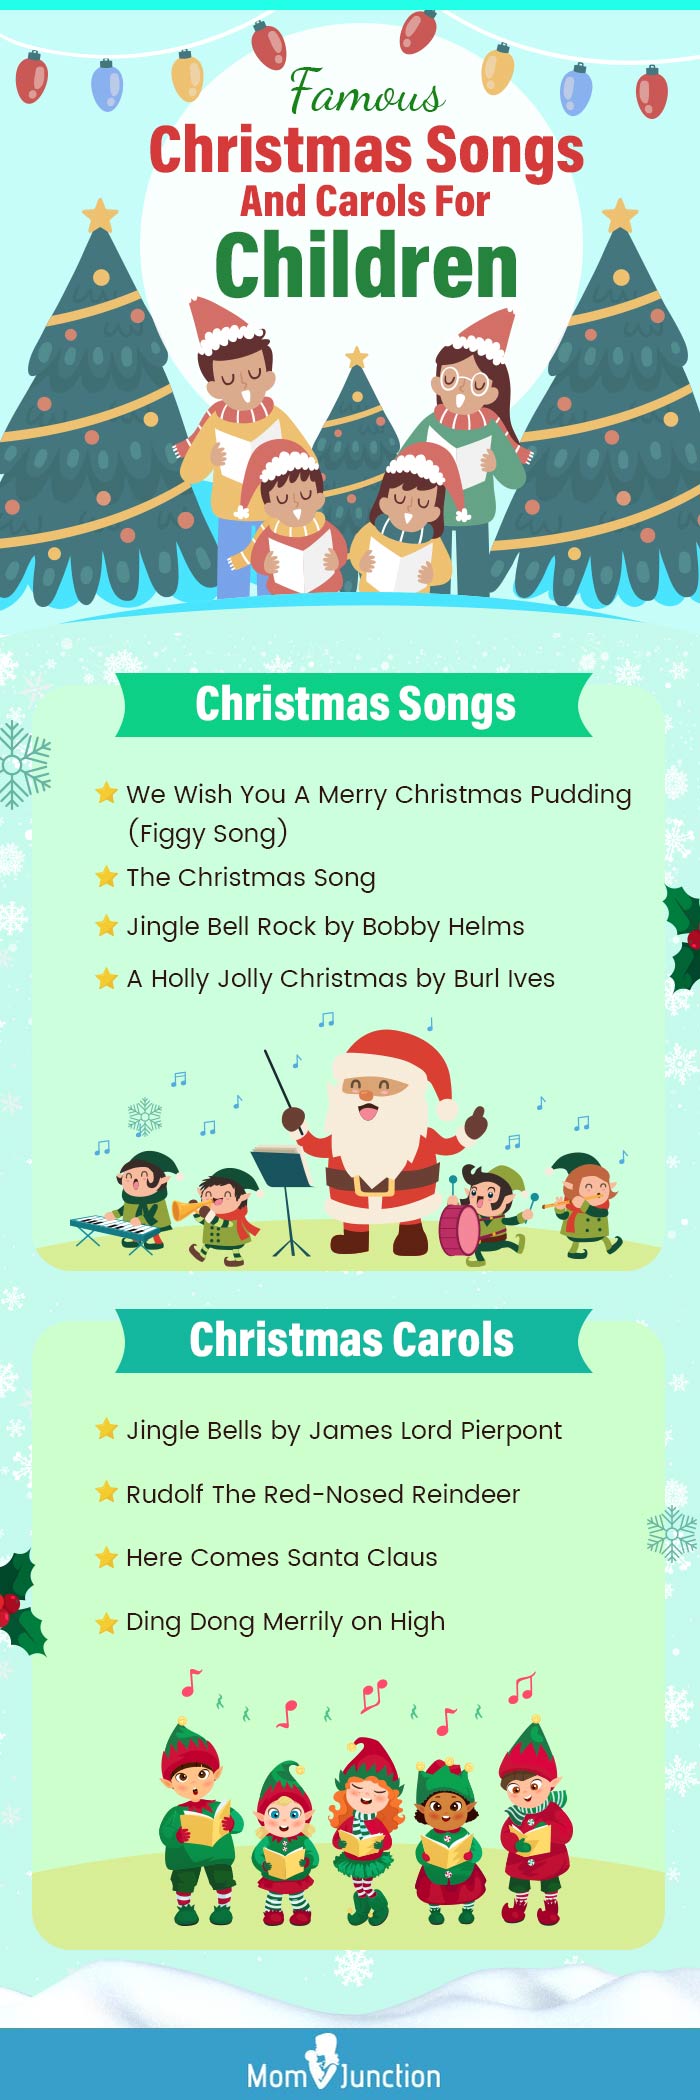 famous christmas songs and carols for children (infographic)